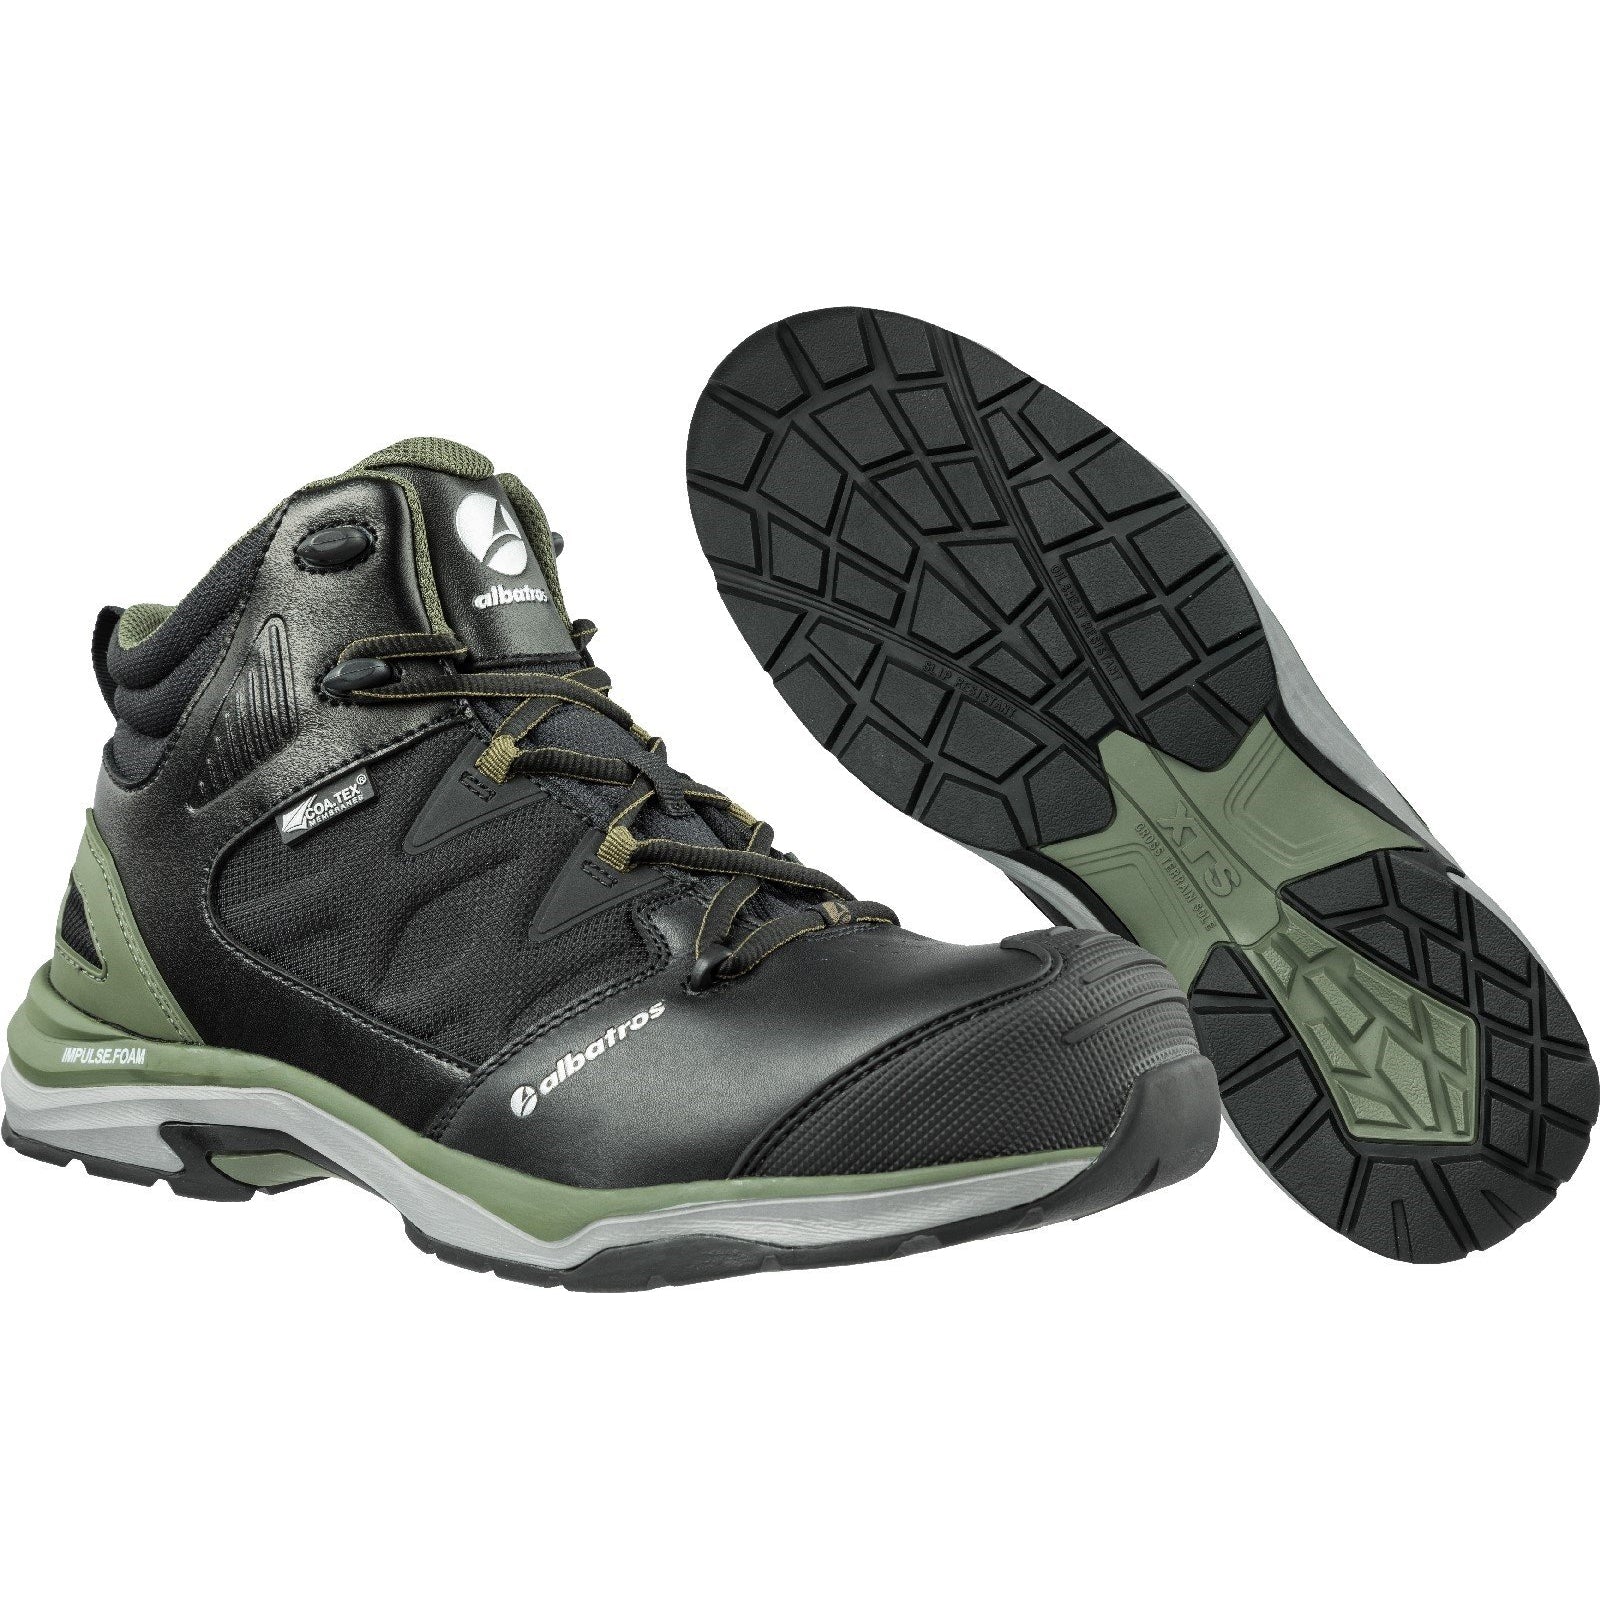 Albatros Ultratrail Olive Ctx Boots Workwear Mid – GS Safety